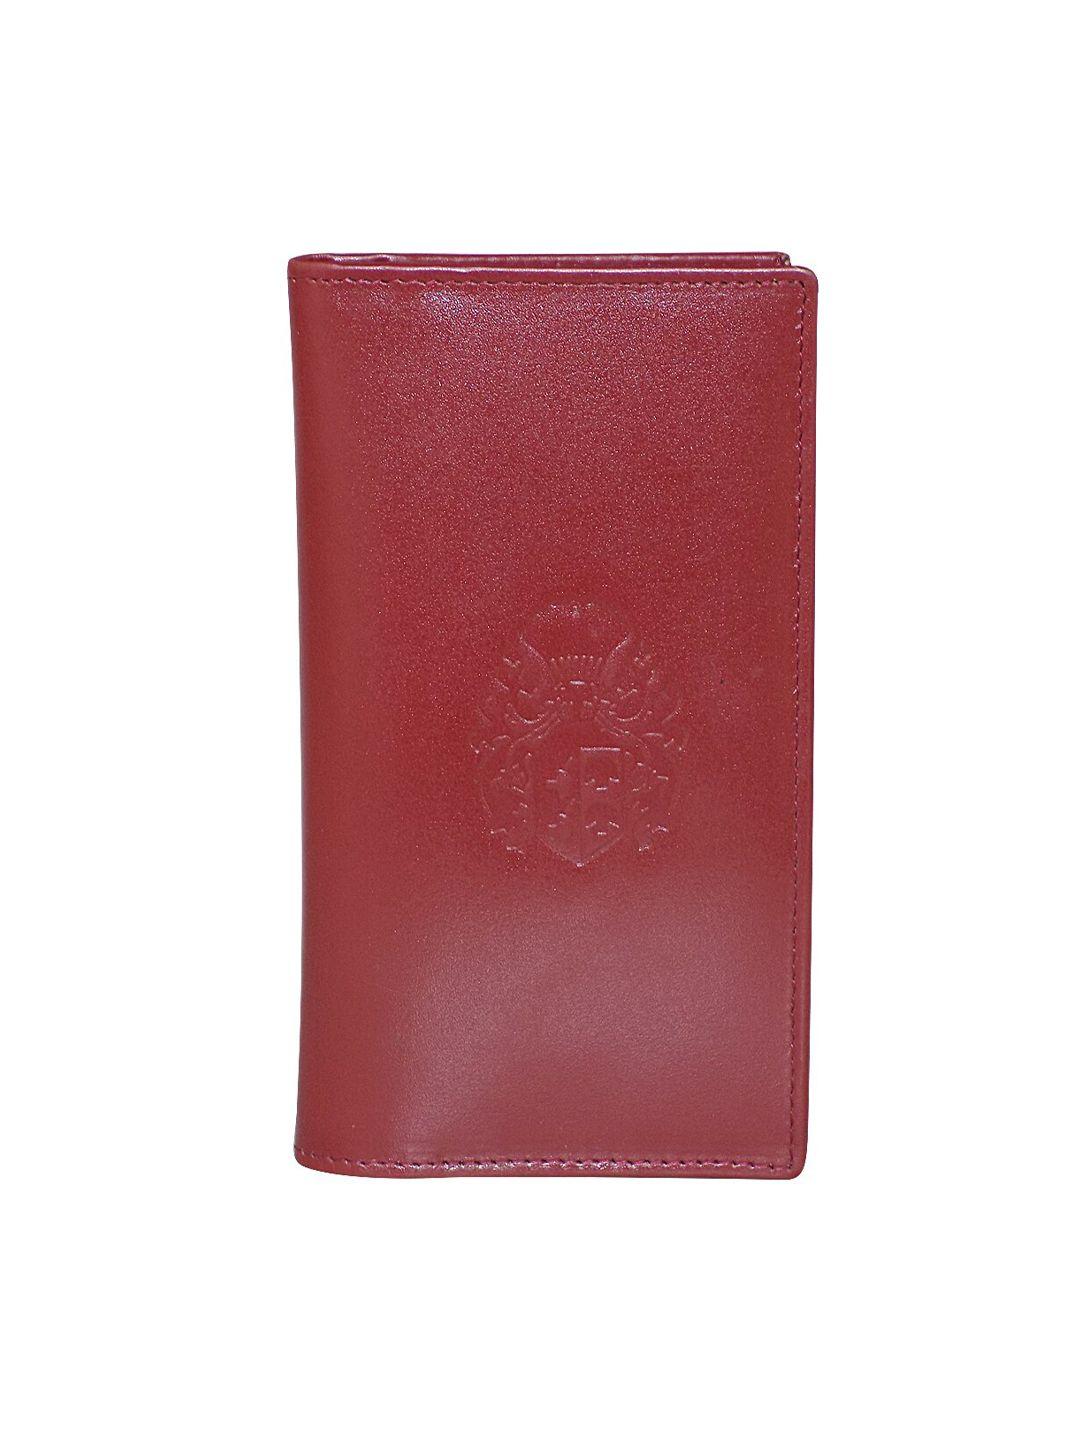 style shoes unisex leather two fold wallet